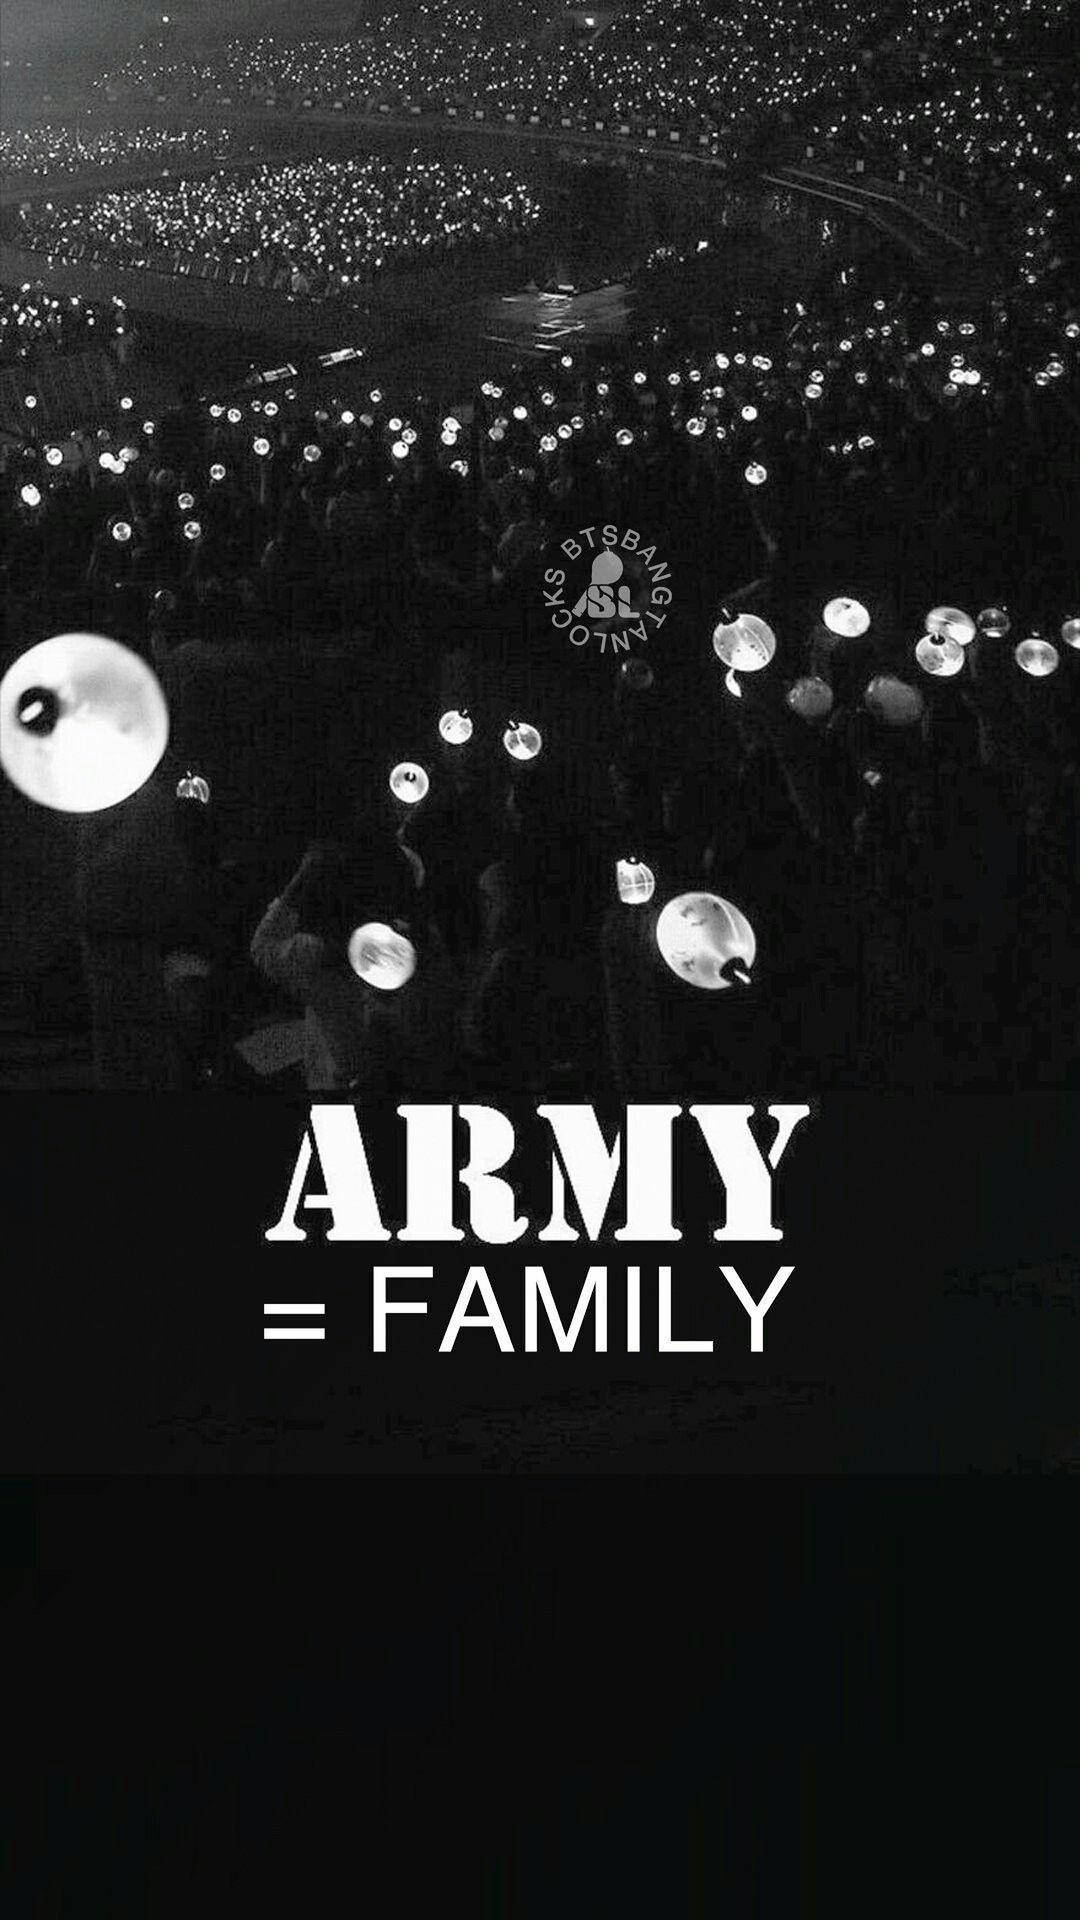 Bts Army Family Background